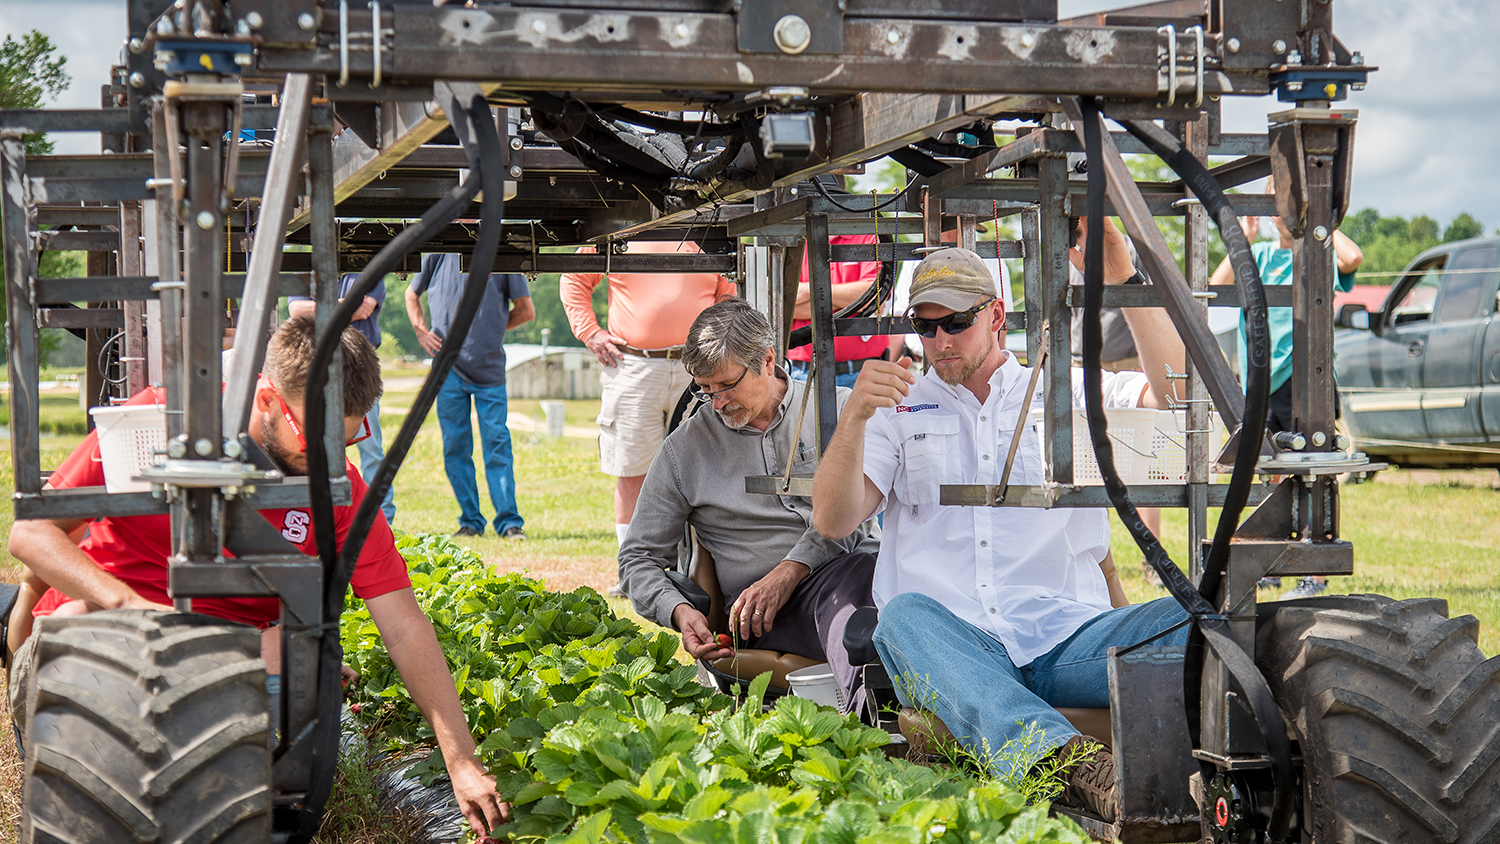 Strawberry Field Day participants got a chance to try out a motorized harvest aid called the Glean Machine